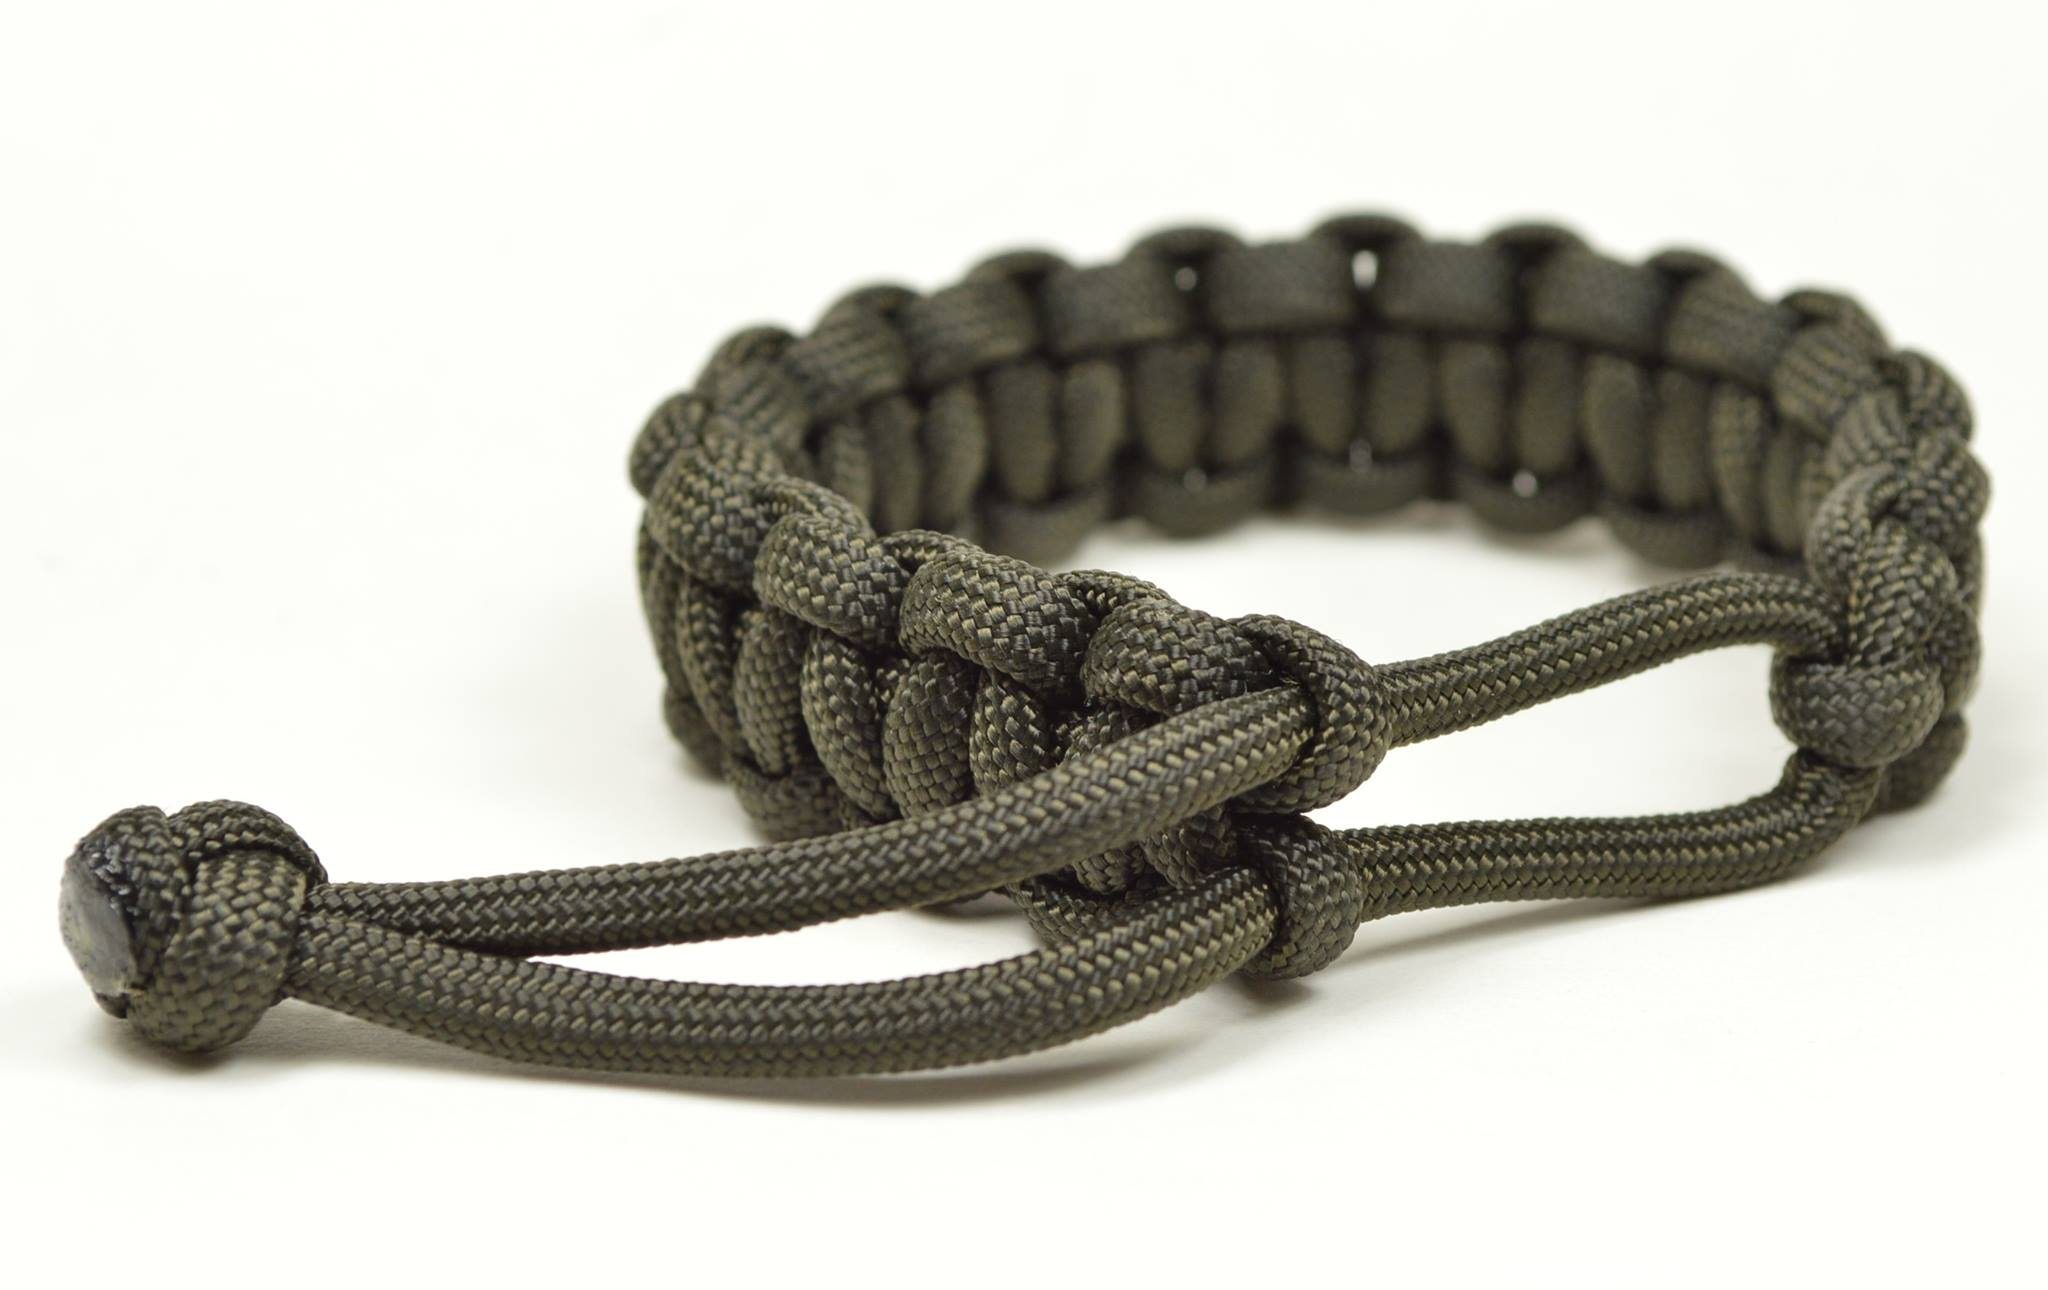 How to Use Survival Paracord